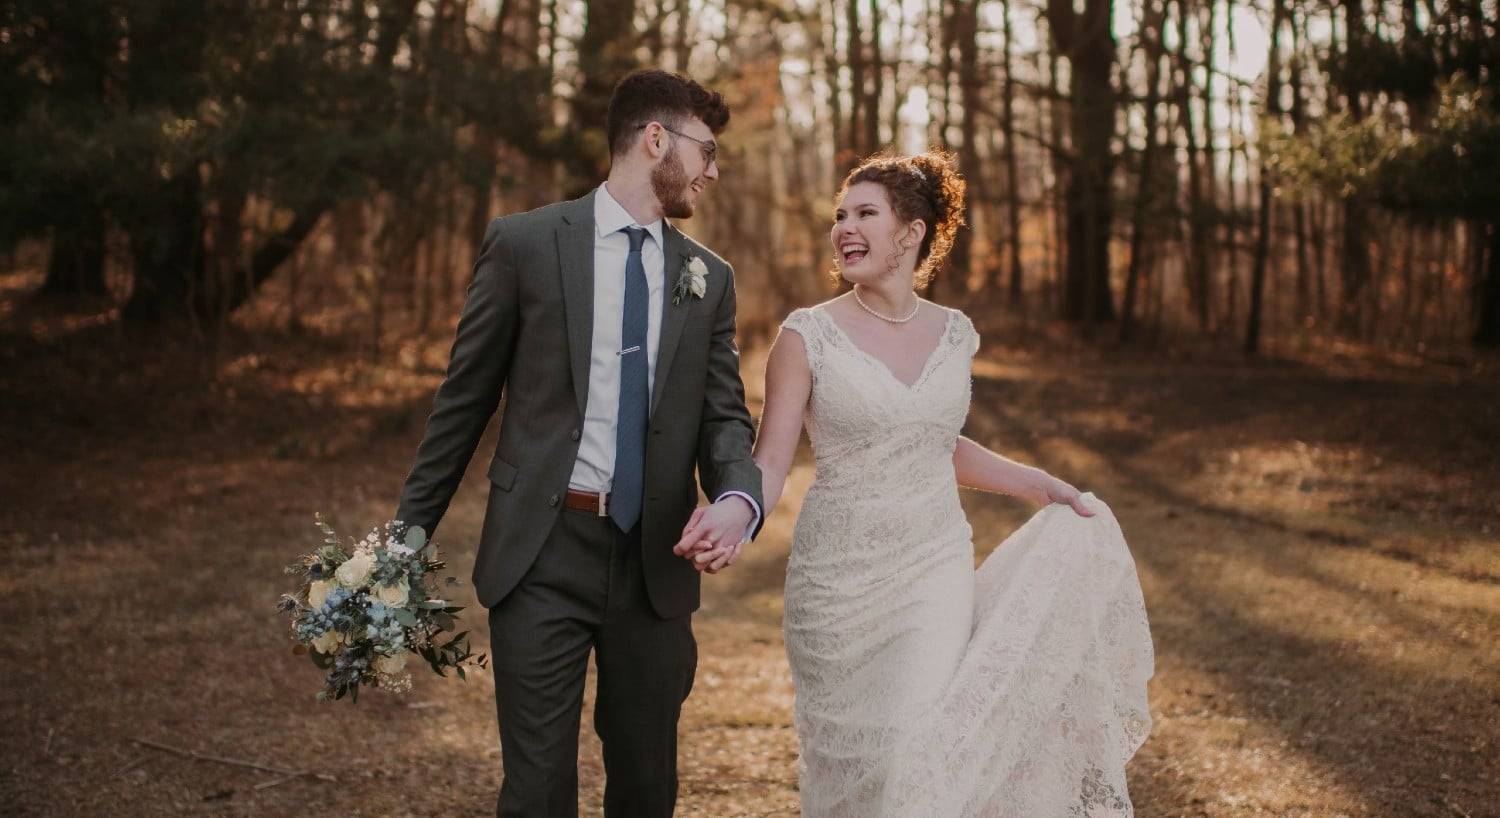 A bride and groom smiling and laughing together during a walk in the woods